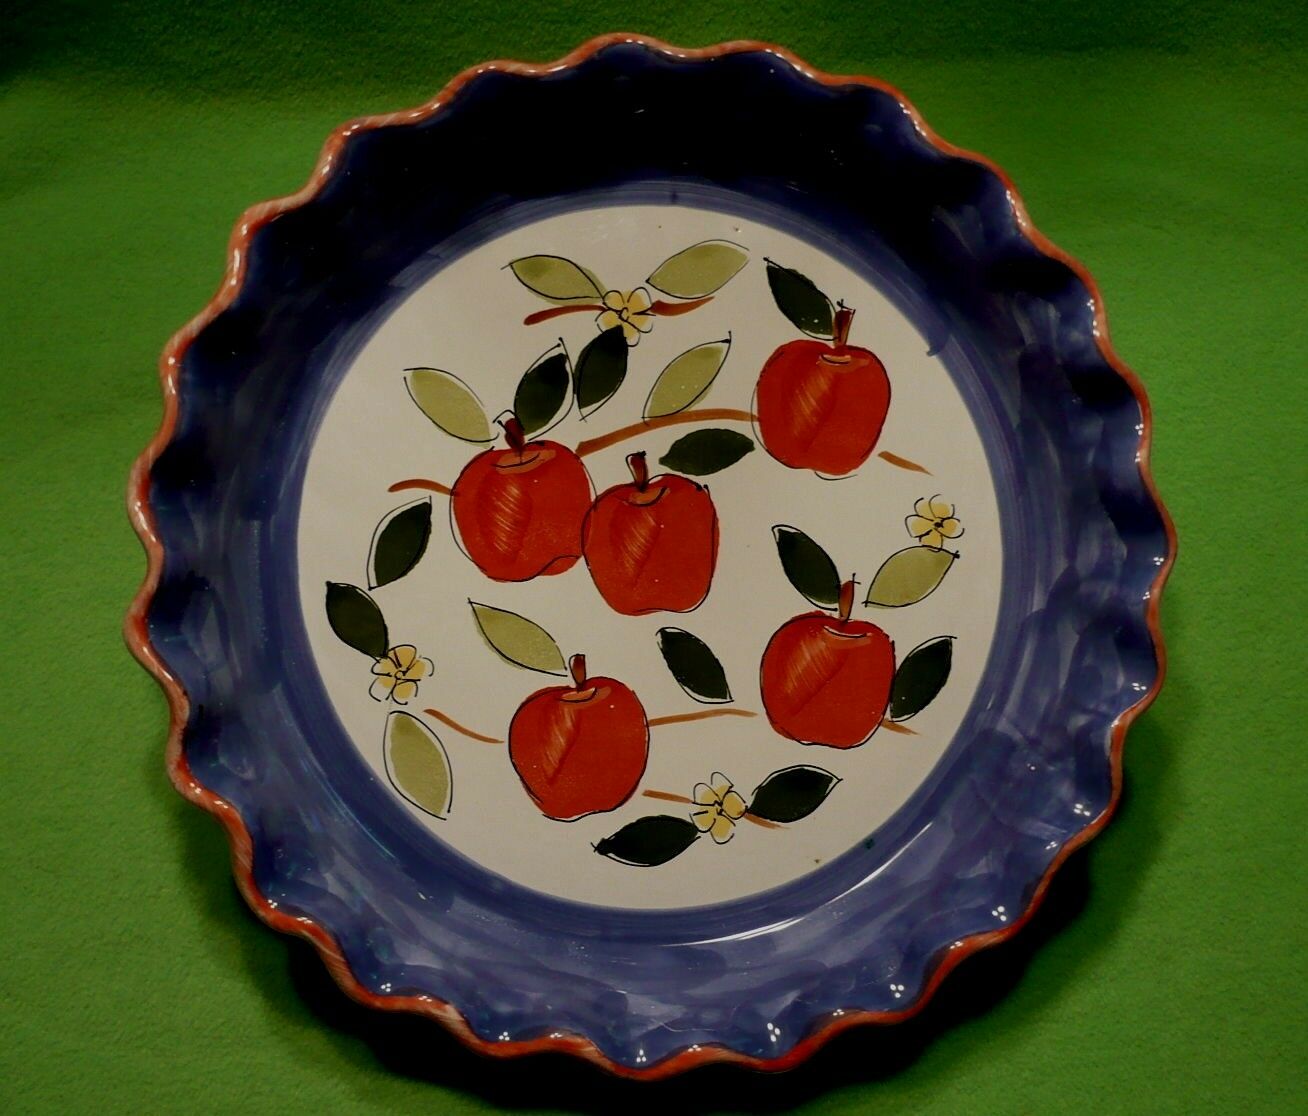 Mesa Int. Pottery Hungary Pie Or Quiche Plate W/ Colorful Hand Painted Apples.